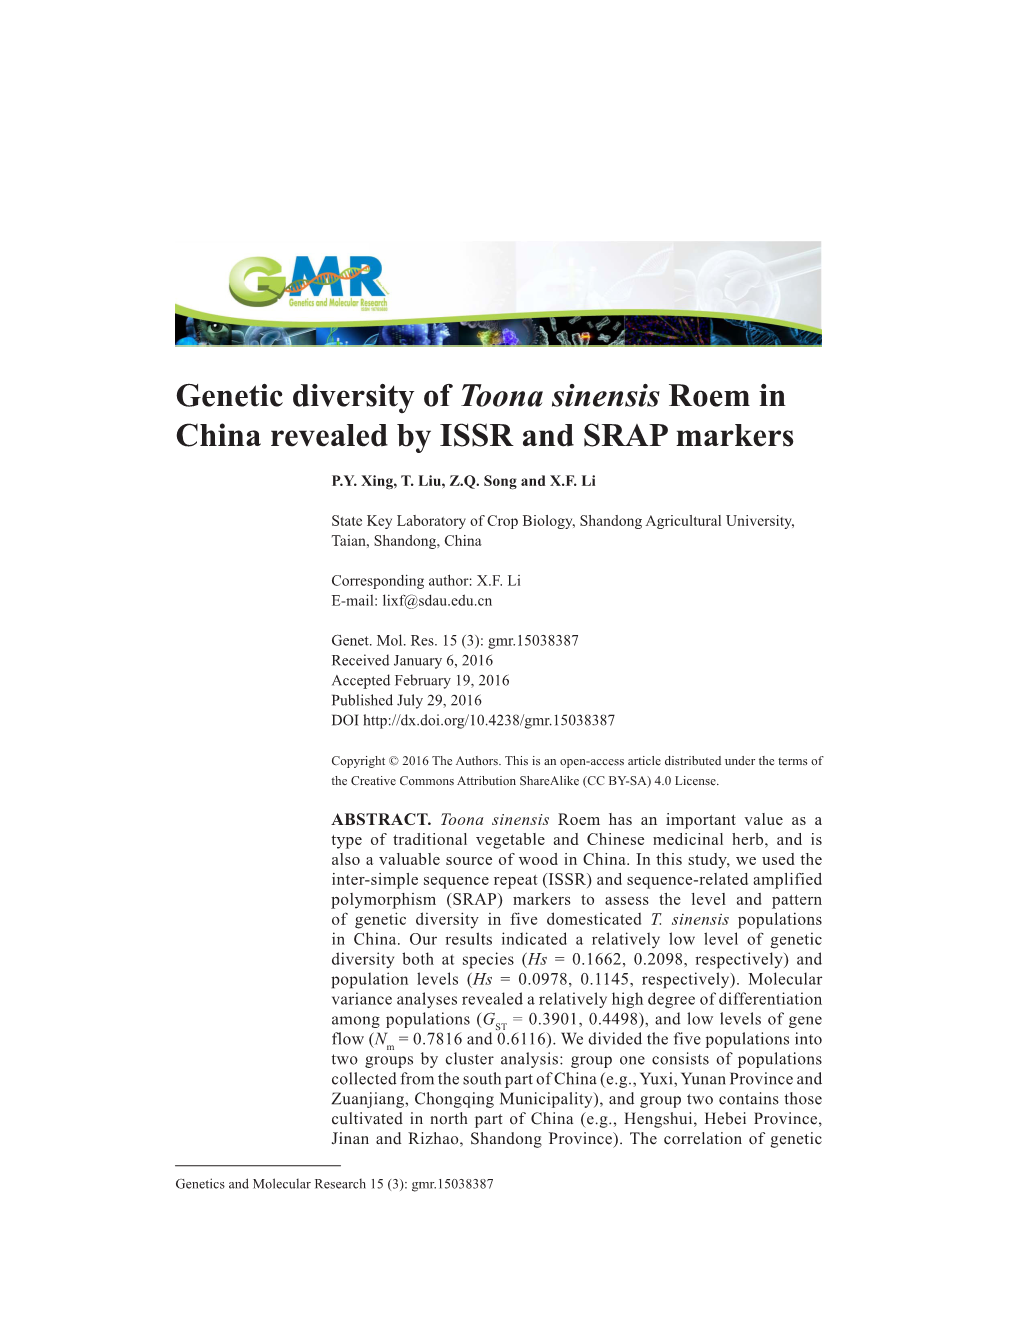 Genetic Diversity of Toona Sinensis Roem in China Revealed by ISSR and SRAP Markers